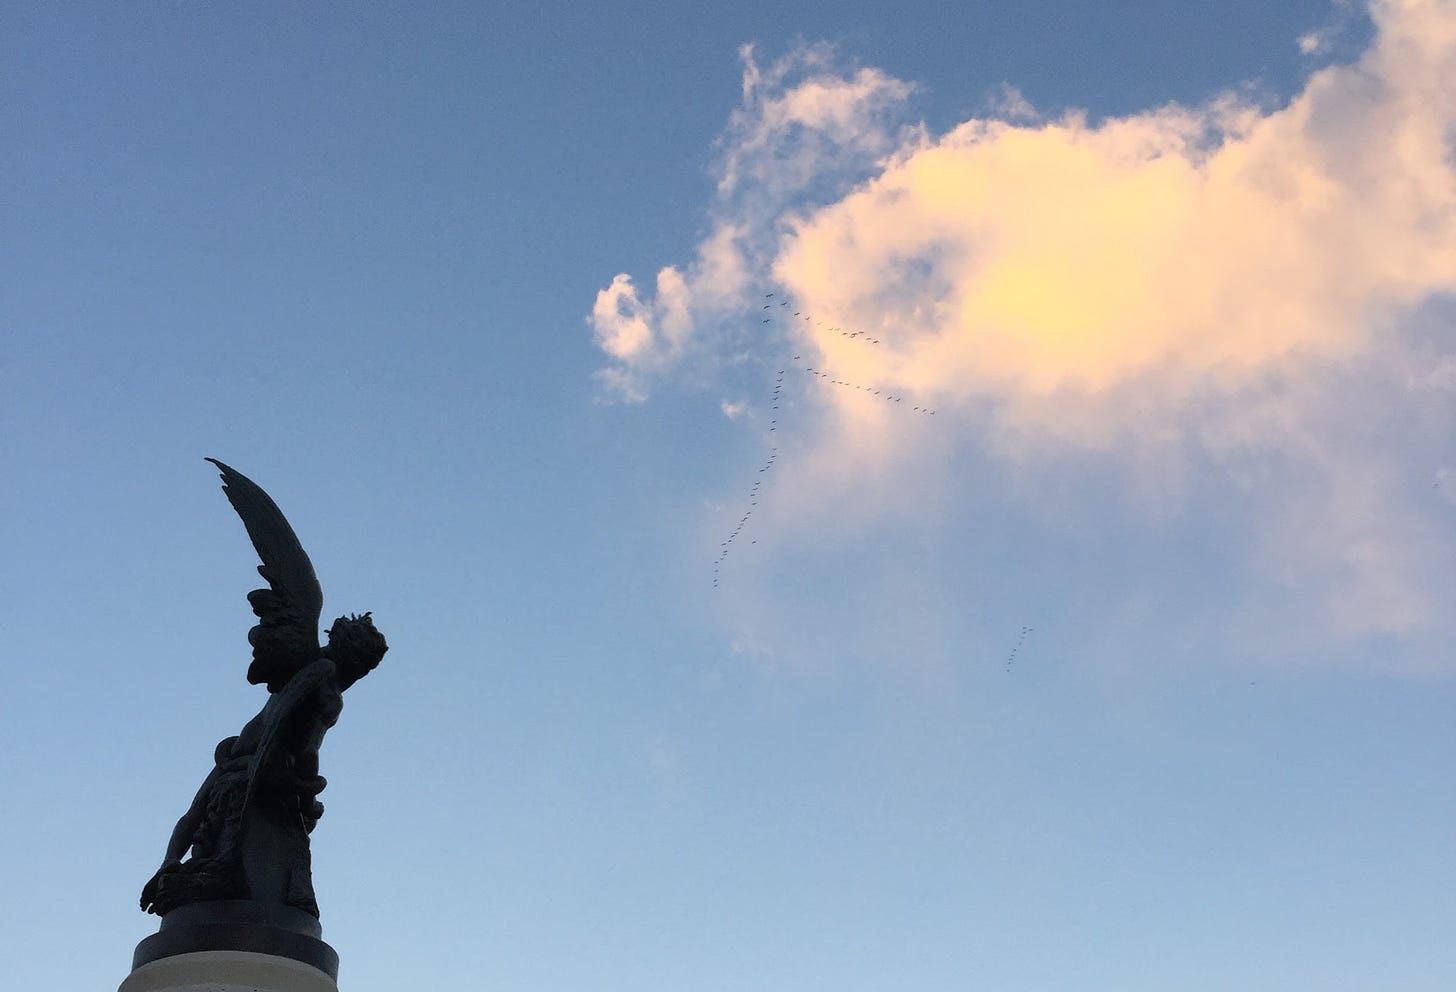 A photo looking up at the silhouette of an angel sculpture, set against a blue sky with a “V” formation of birds flying high up above.